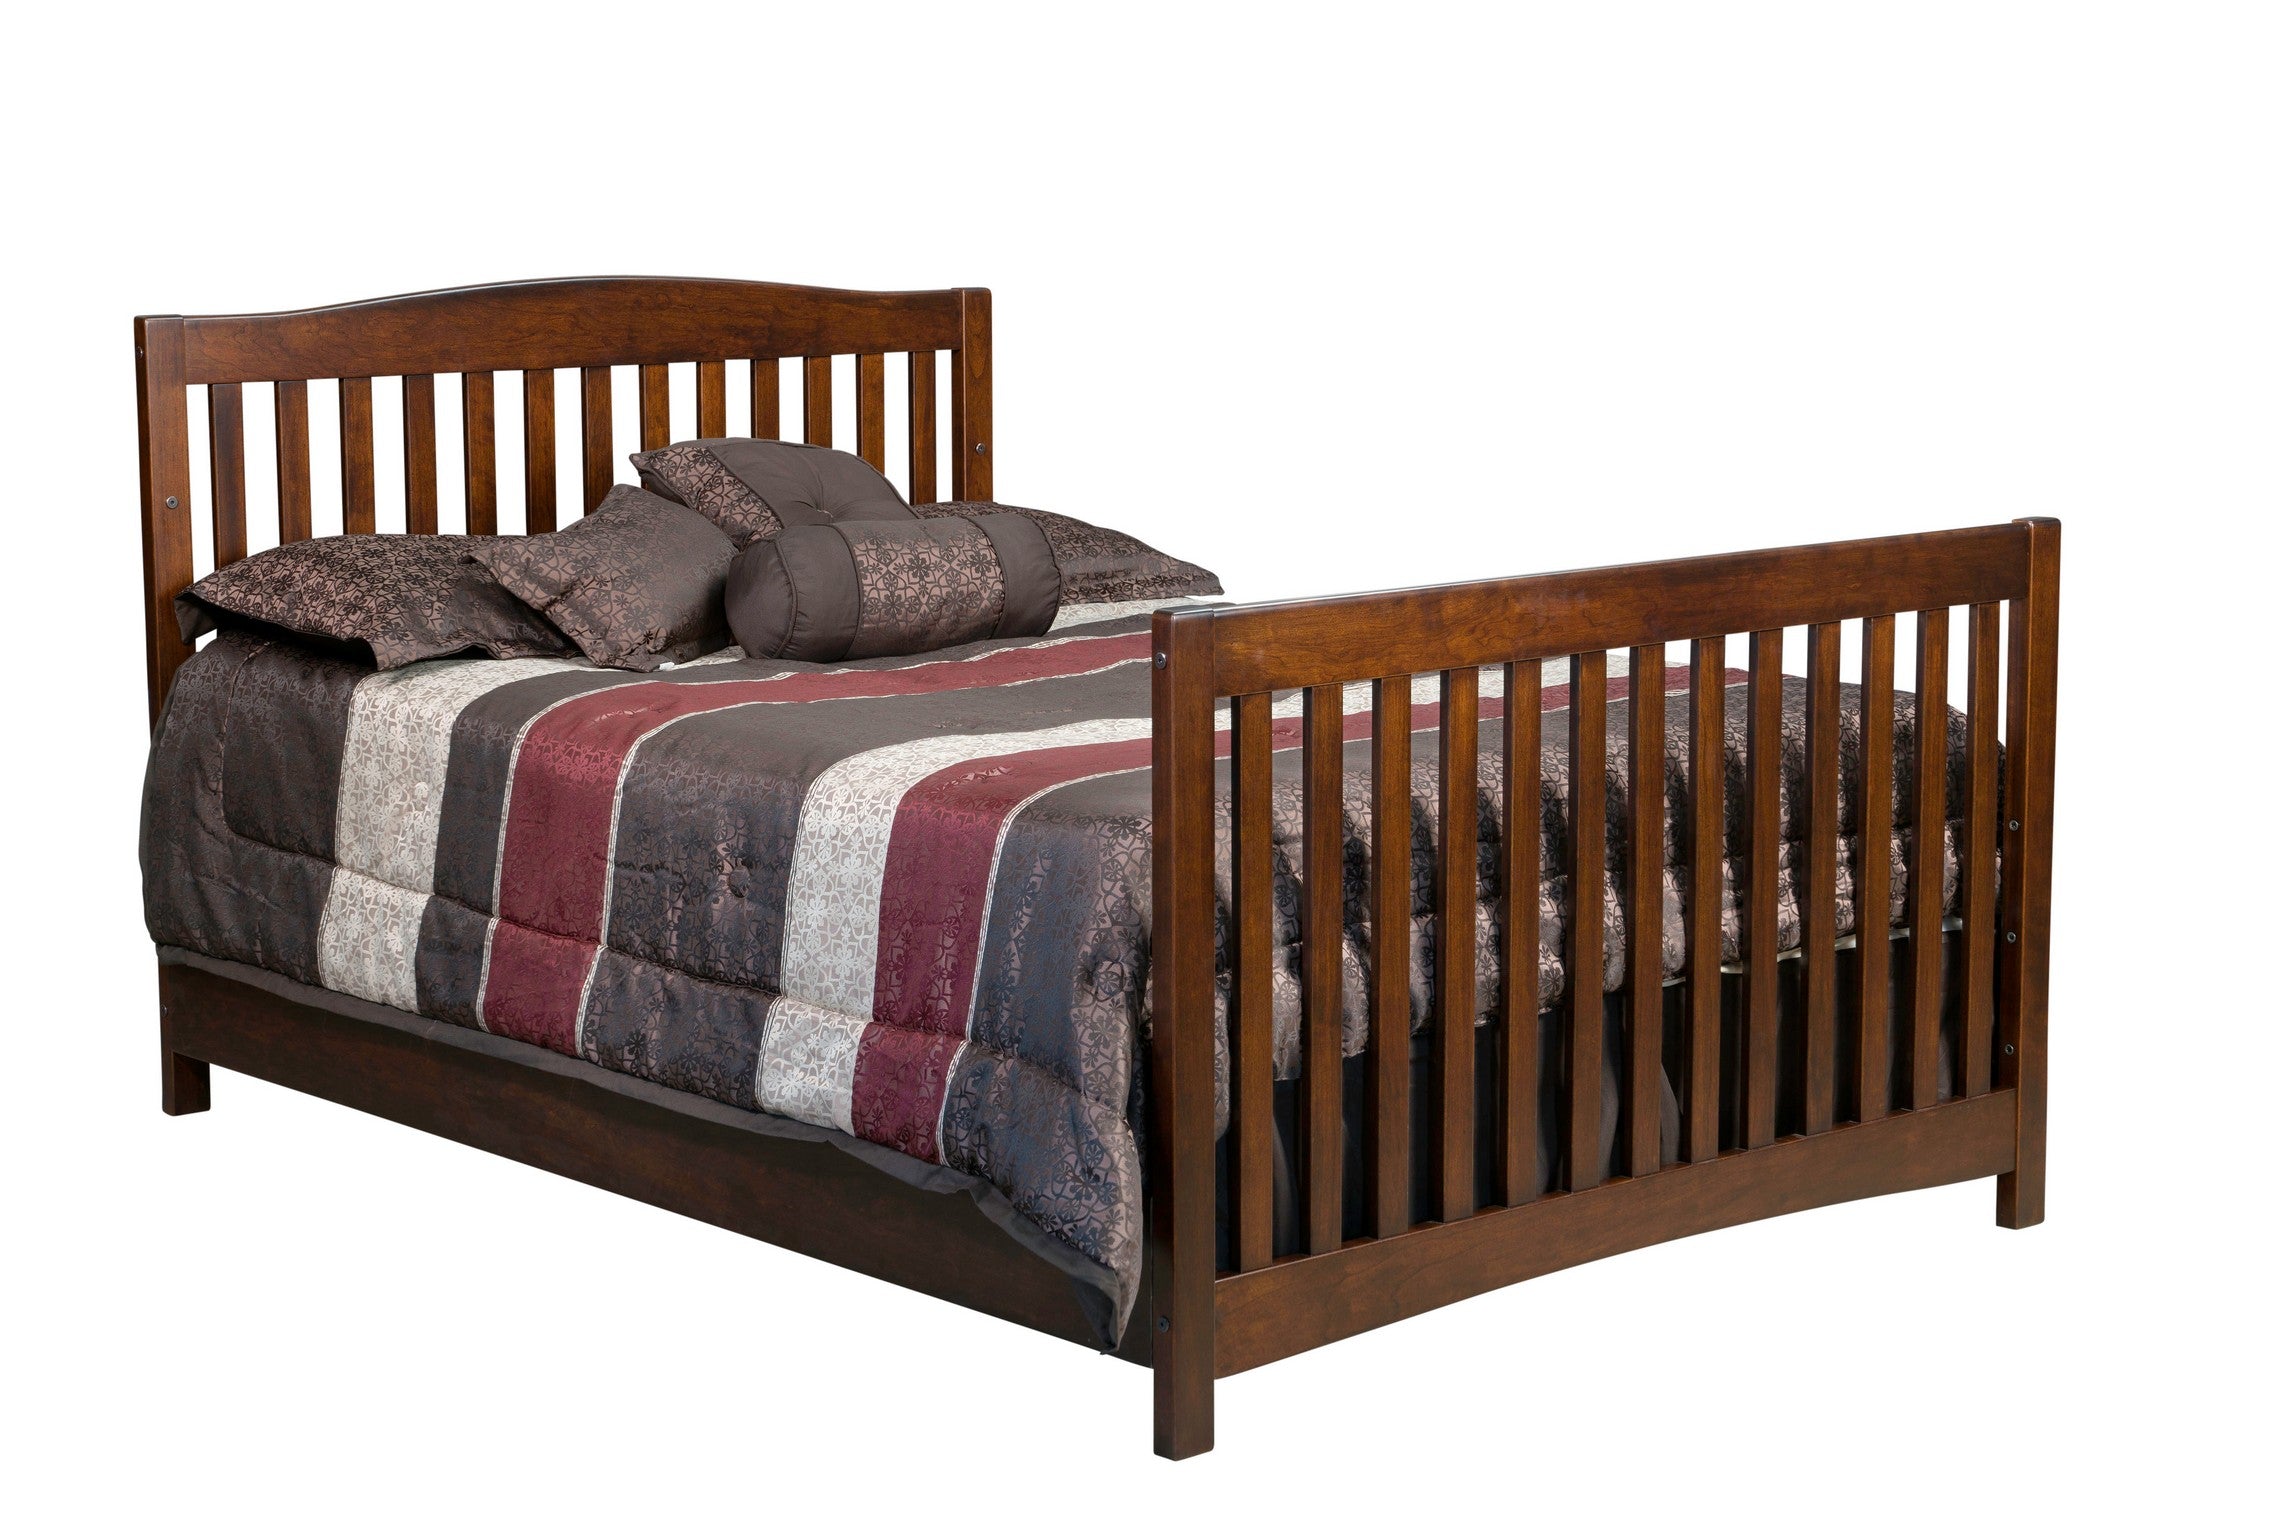 monterey double bed in sap cherry with rich tobacco stain